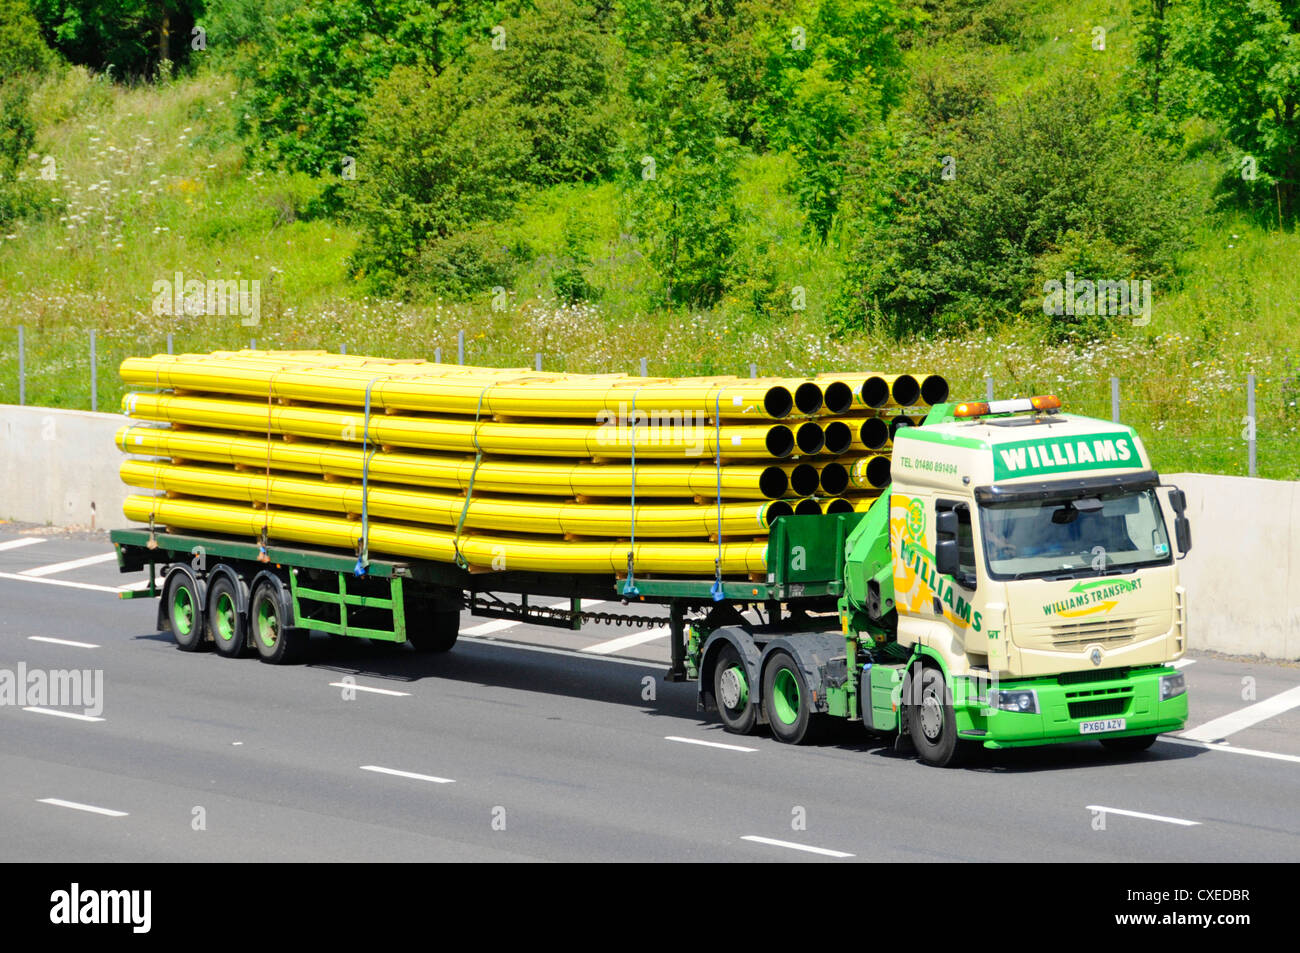 Haulage Contractor lorry and trailer transporting a load of yellow gas pipes Stock Photo